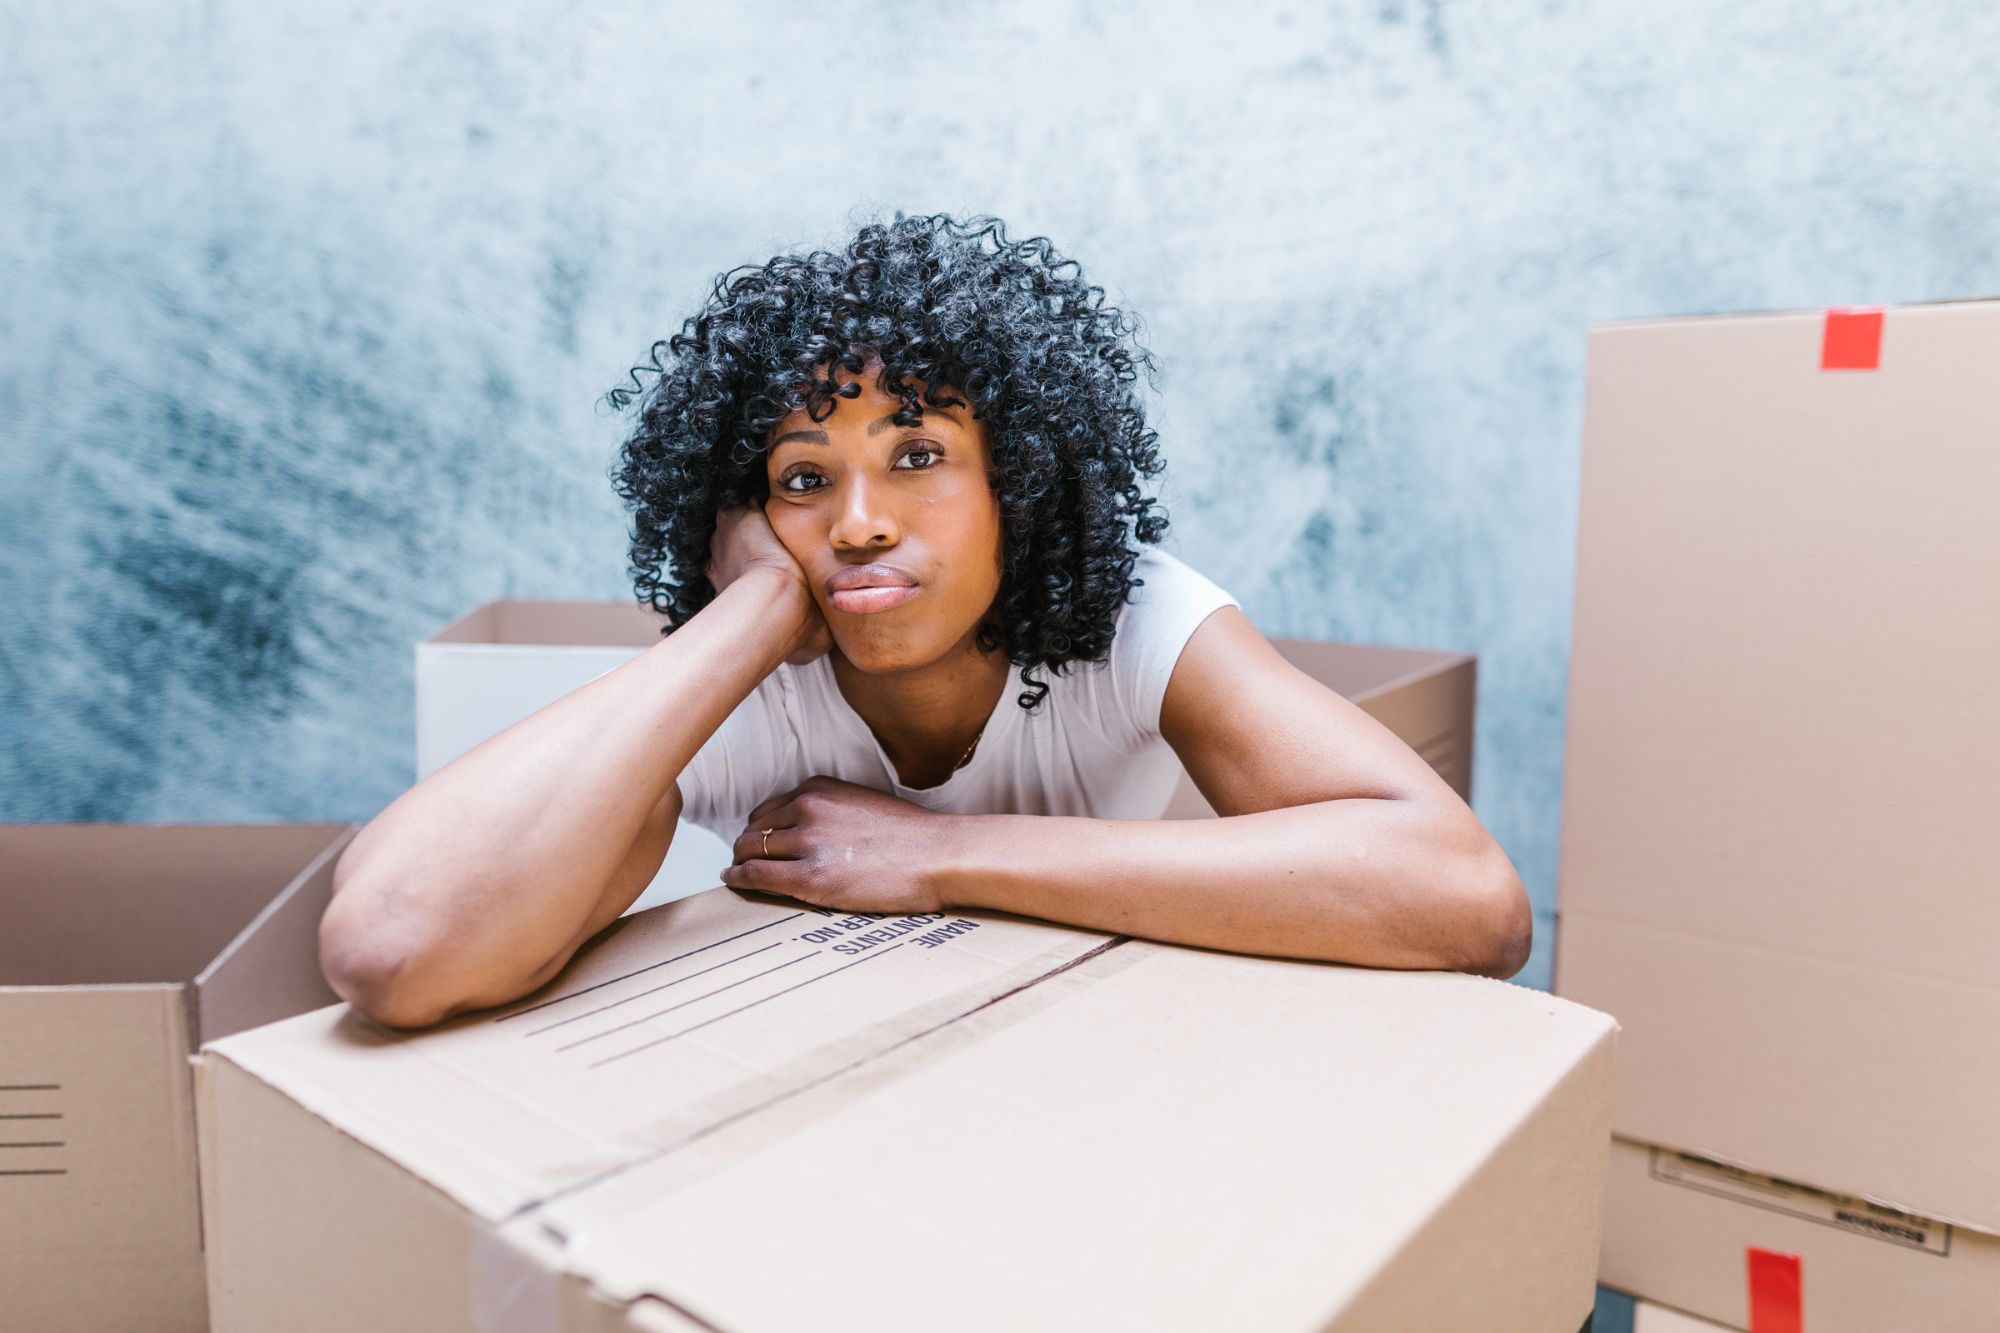 A frustrated looking woman is surrounded by packed boxes while she contemplates how to move on after divorce.